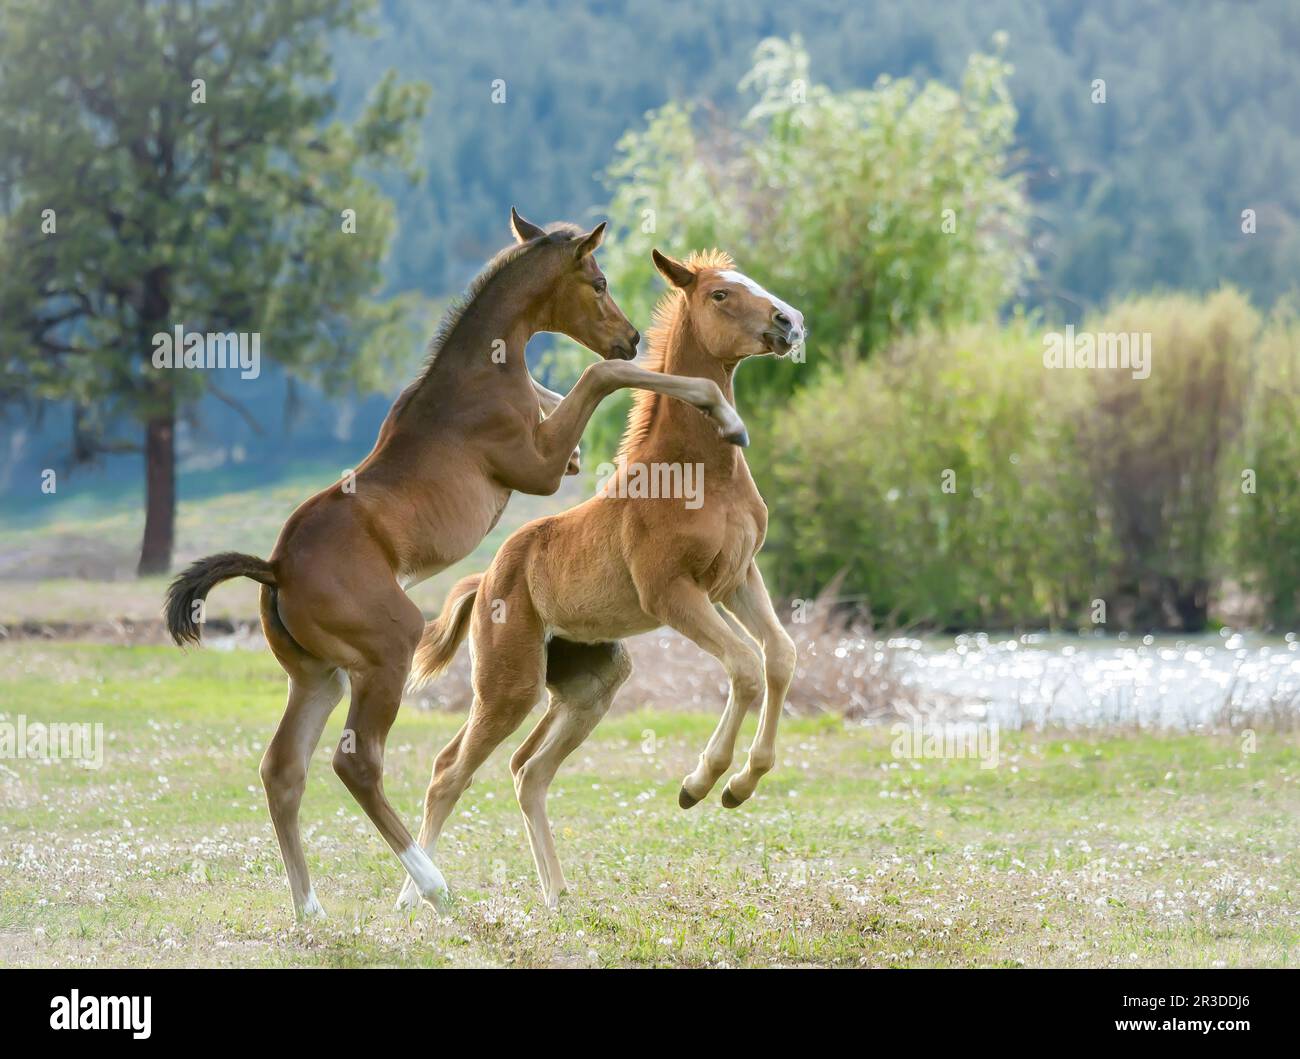 Thoroughbred horse foals  romp and play in paddock with pond Stock Photo